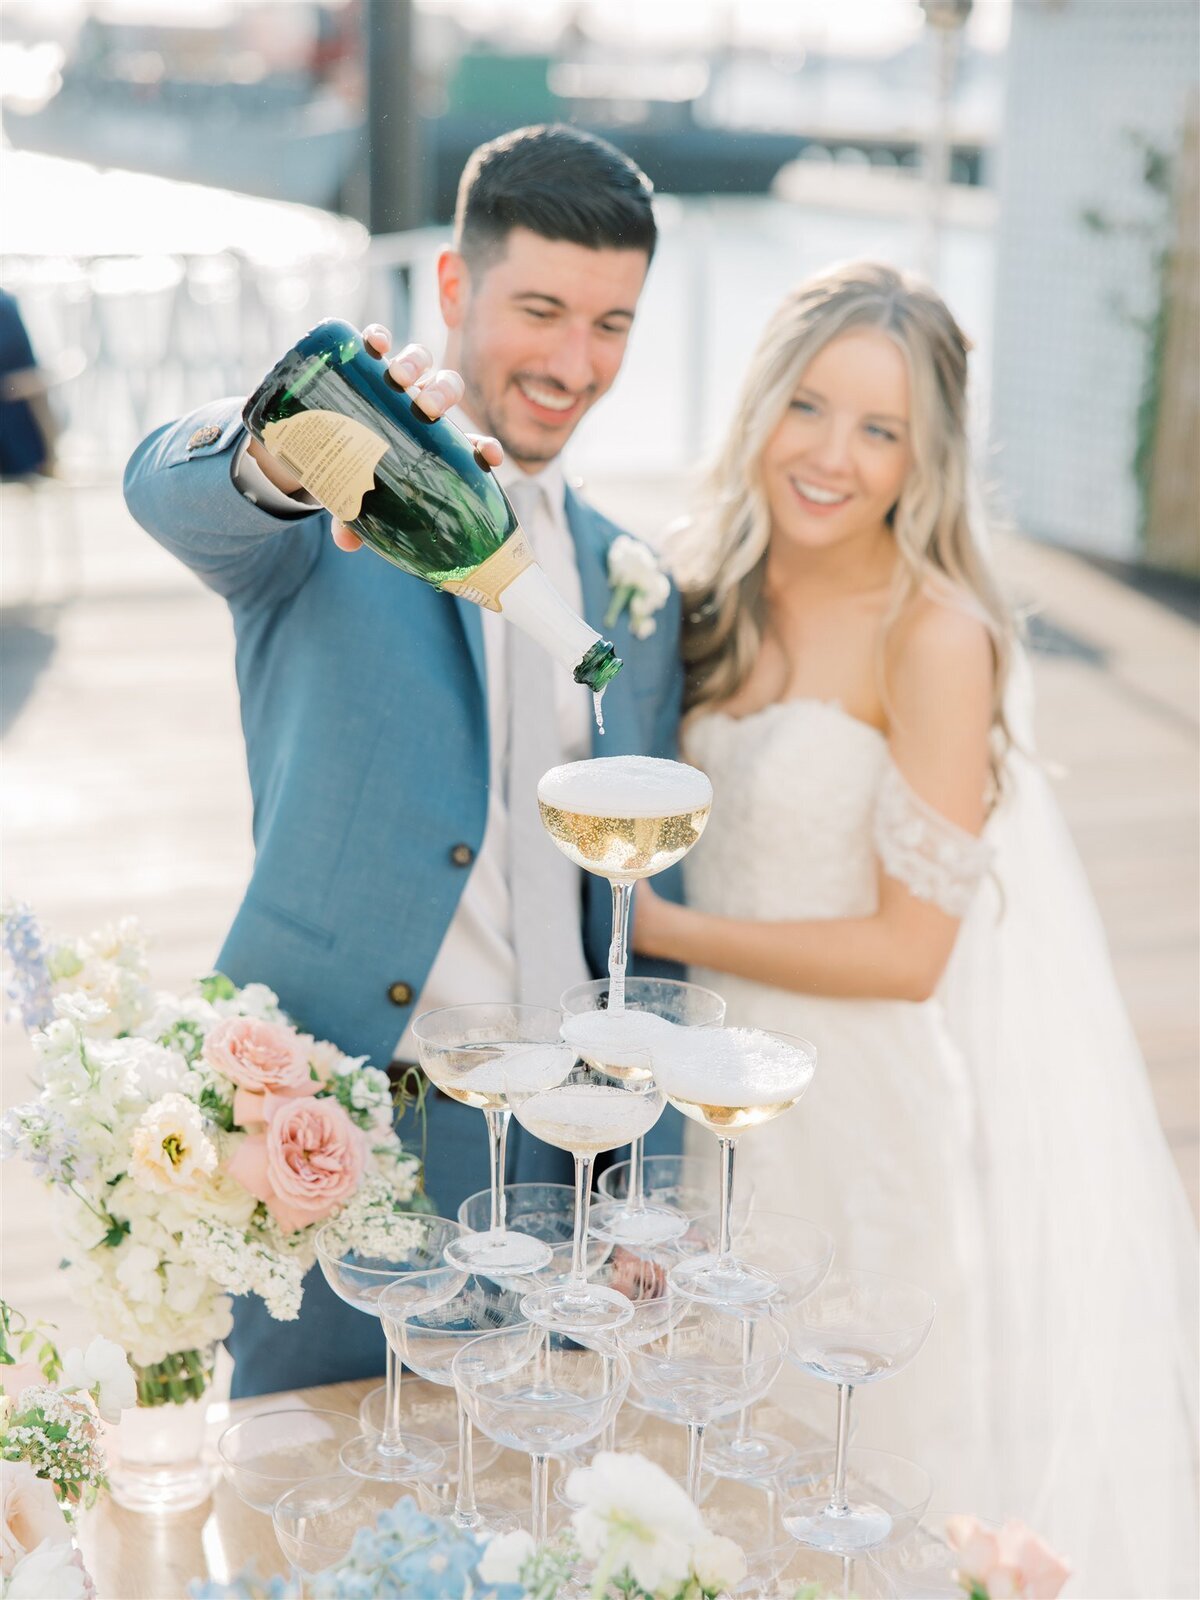 Kate-Murtaugh-Events-wedding-planner-Newport-ceremony-reception-champagne-tower-couple